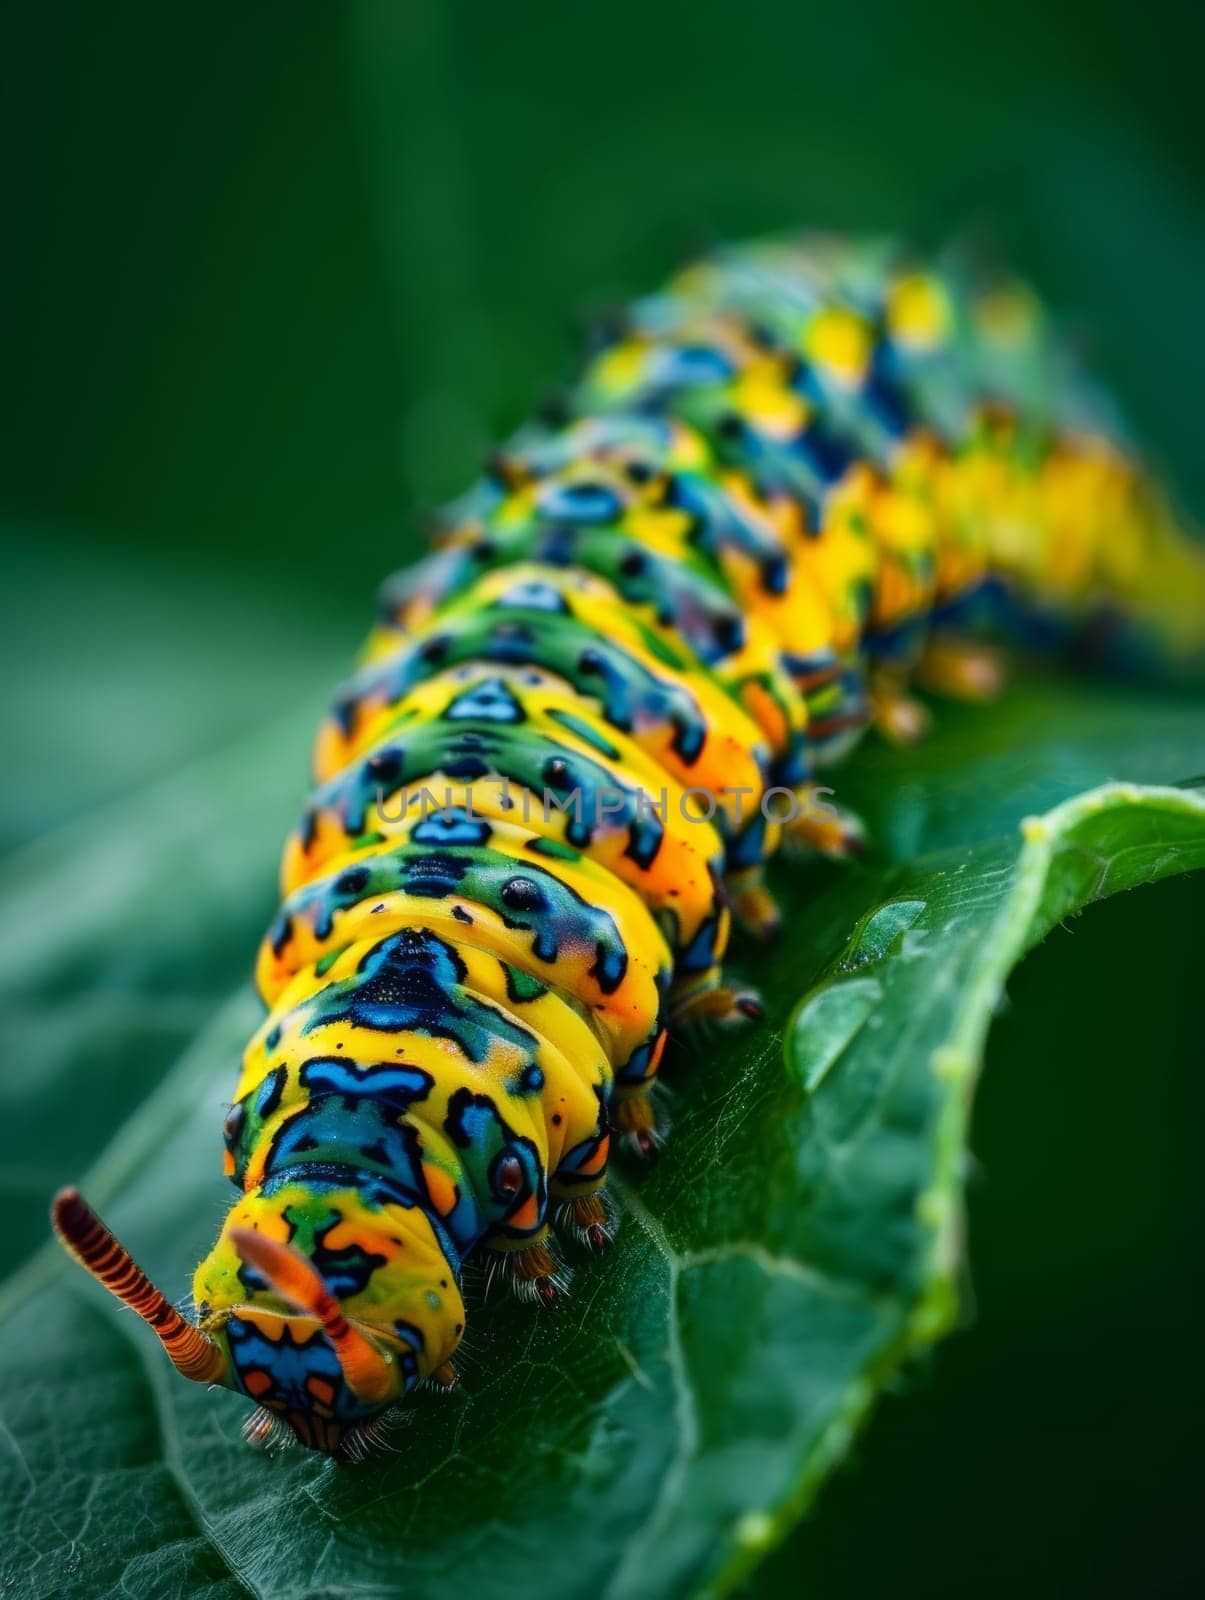 A colorful caterpillar with striking patterns crawls along a lush green leaf, showcasing the remarkable diversity of nature's creatures